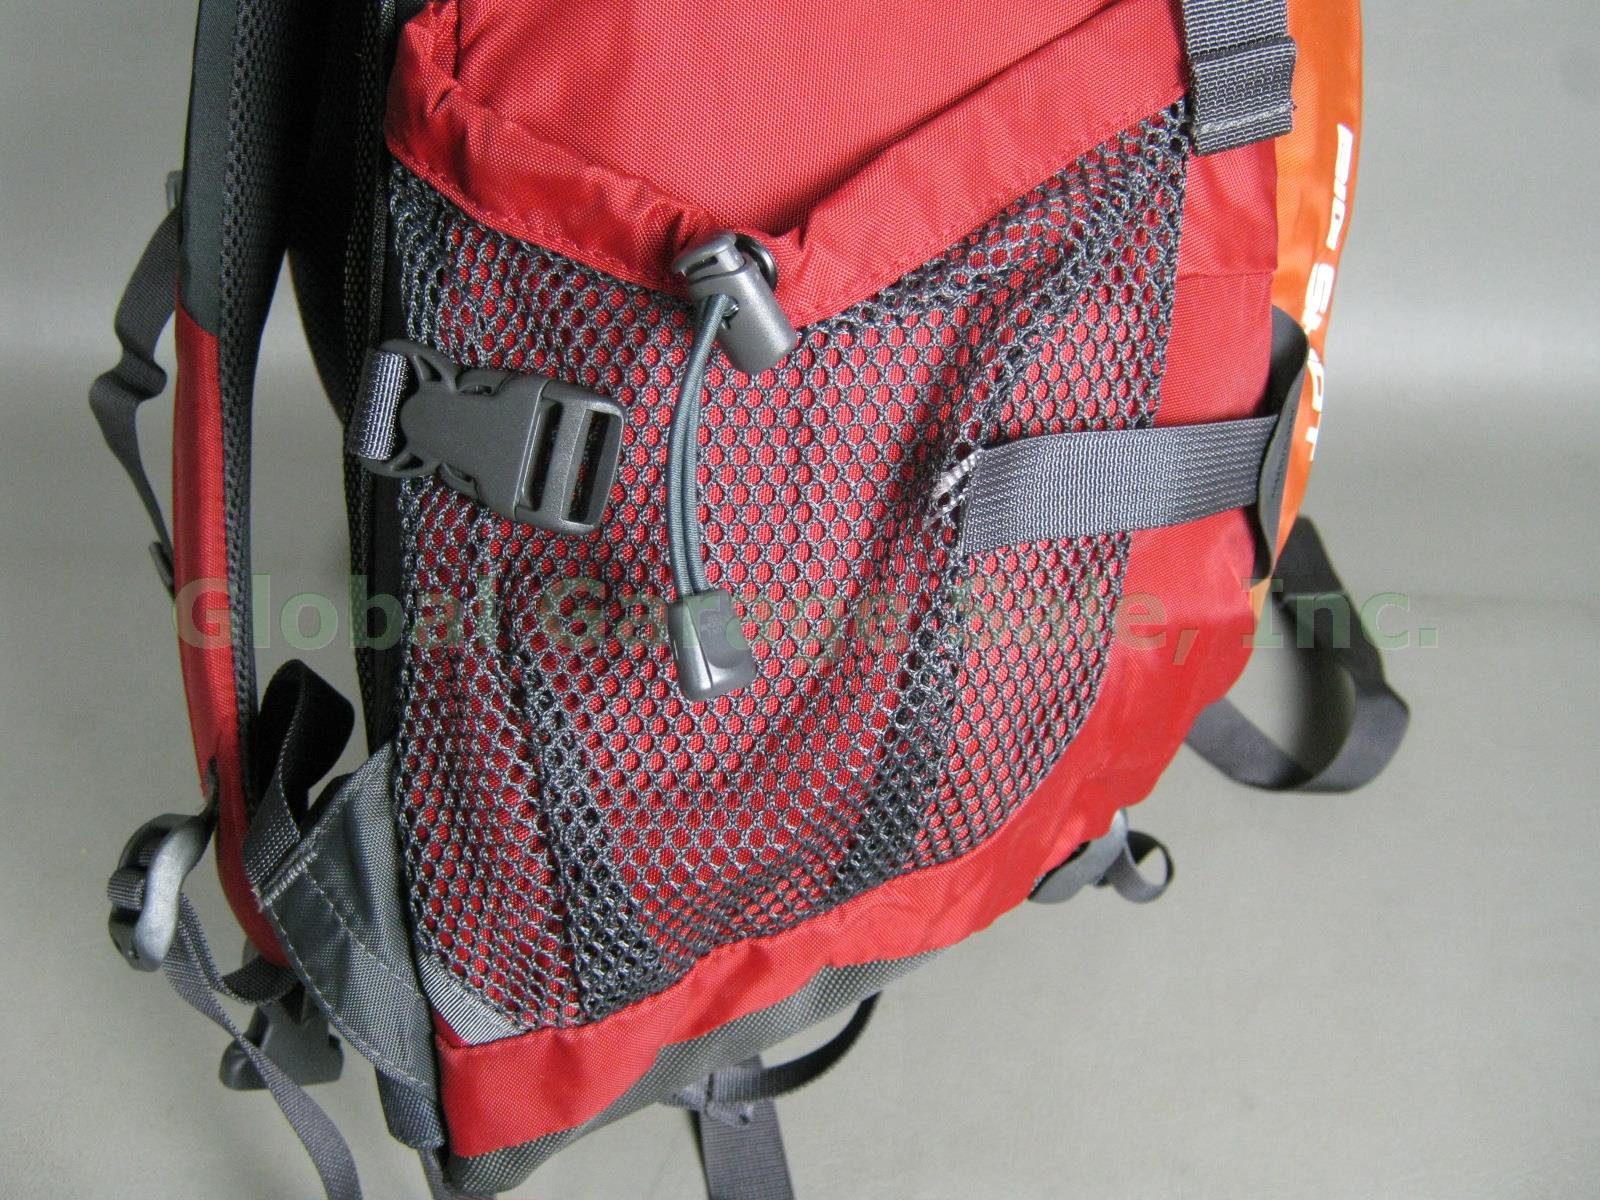 NEW NWT The North Face Big Shot Backpack Day Pack Laptop Book Bag Cardinal Red 6